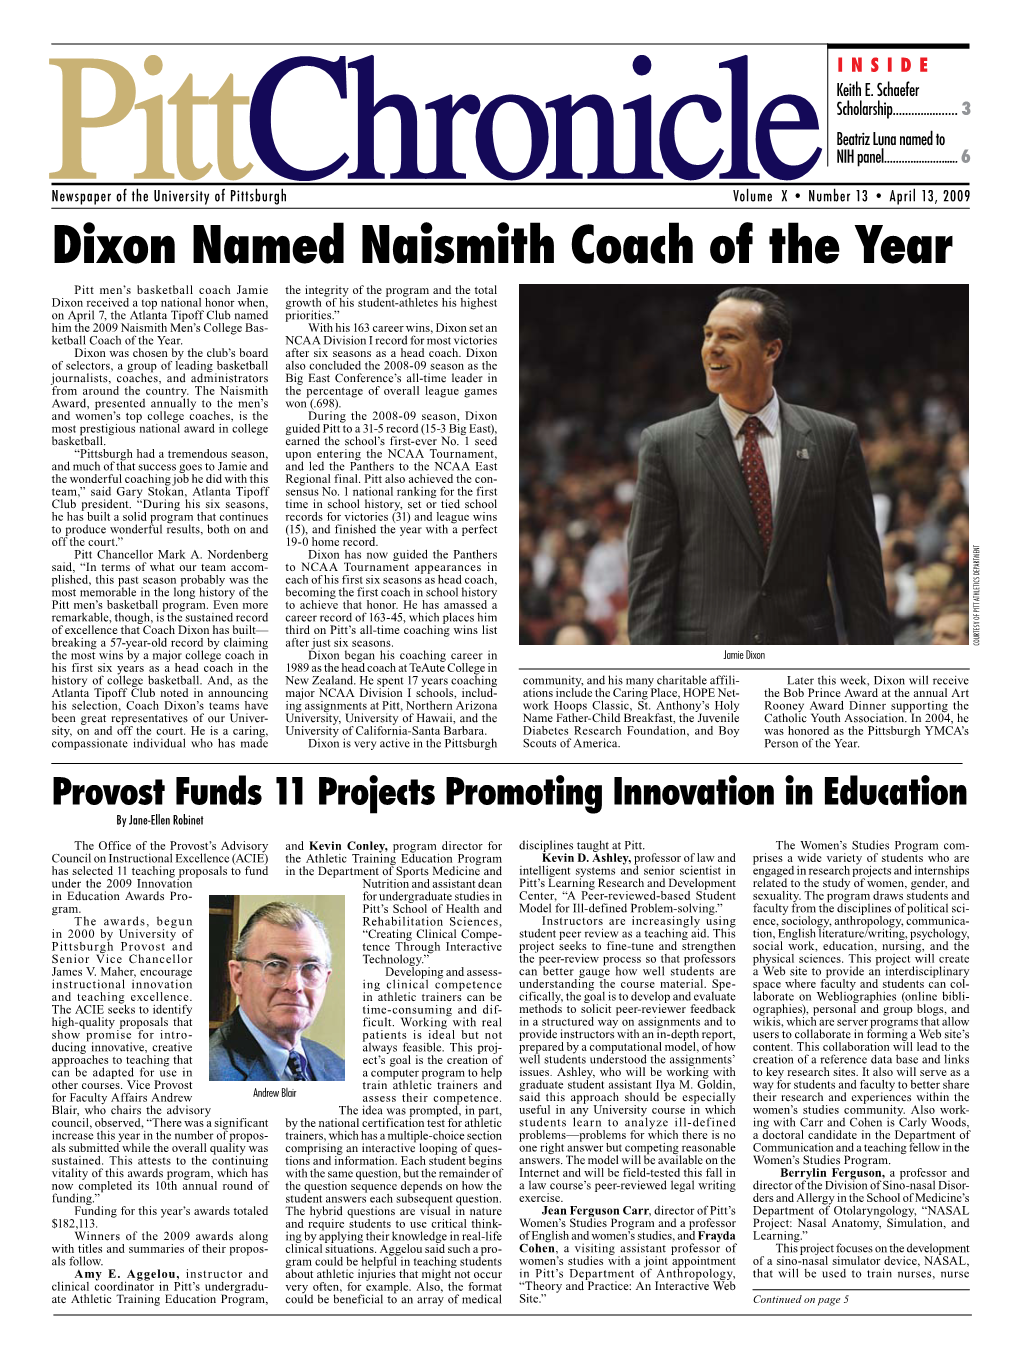 Dixon Named Naismith Coach of the Year